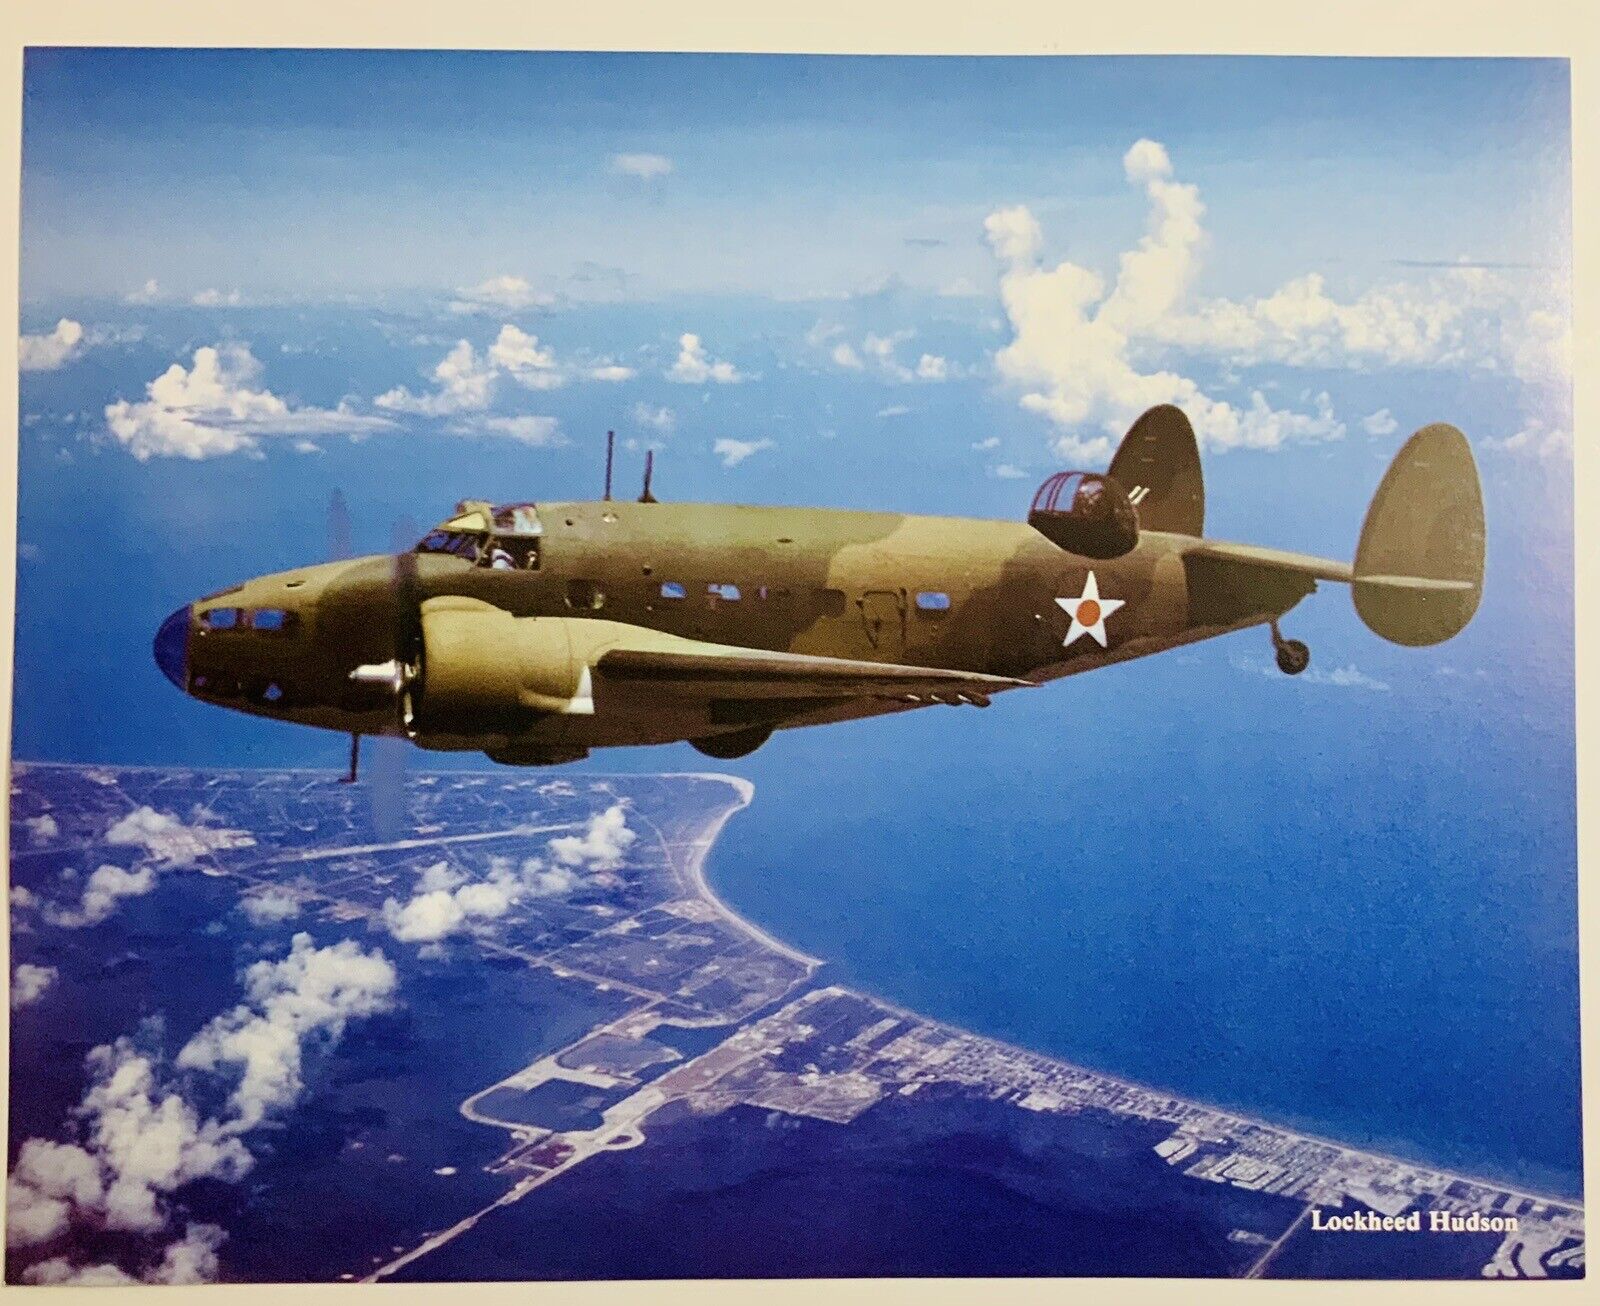 Lockheed Hudson Reconnaissance Bomber 8X10 Color With Specifications On Back